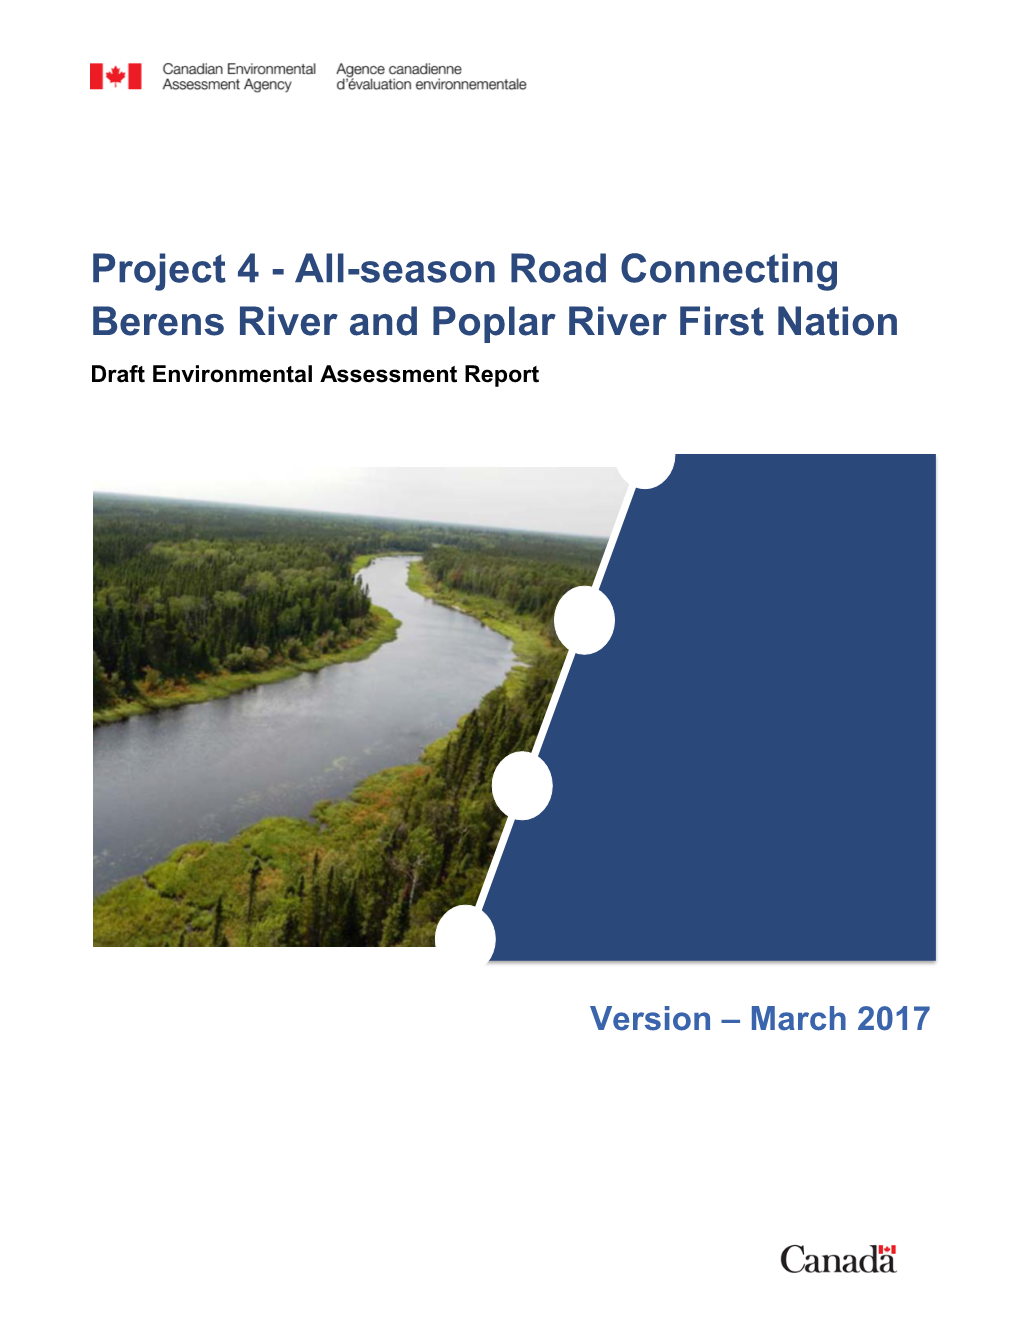 All-Season Road Connecting Berens River and Poplar River First Nation Draft Environmental Assessment Report